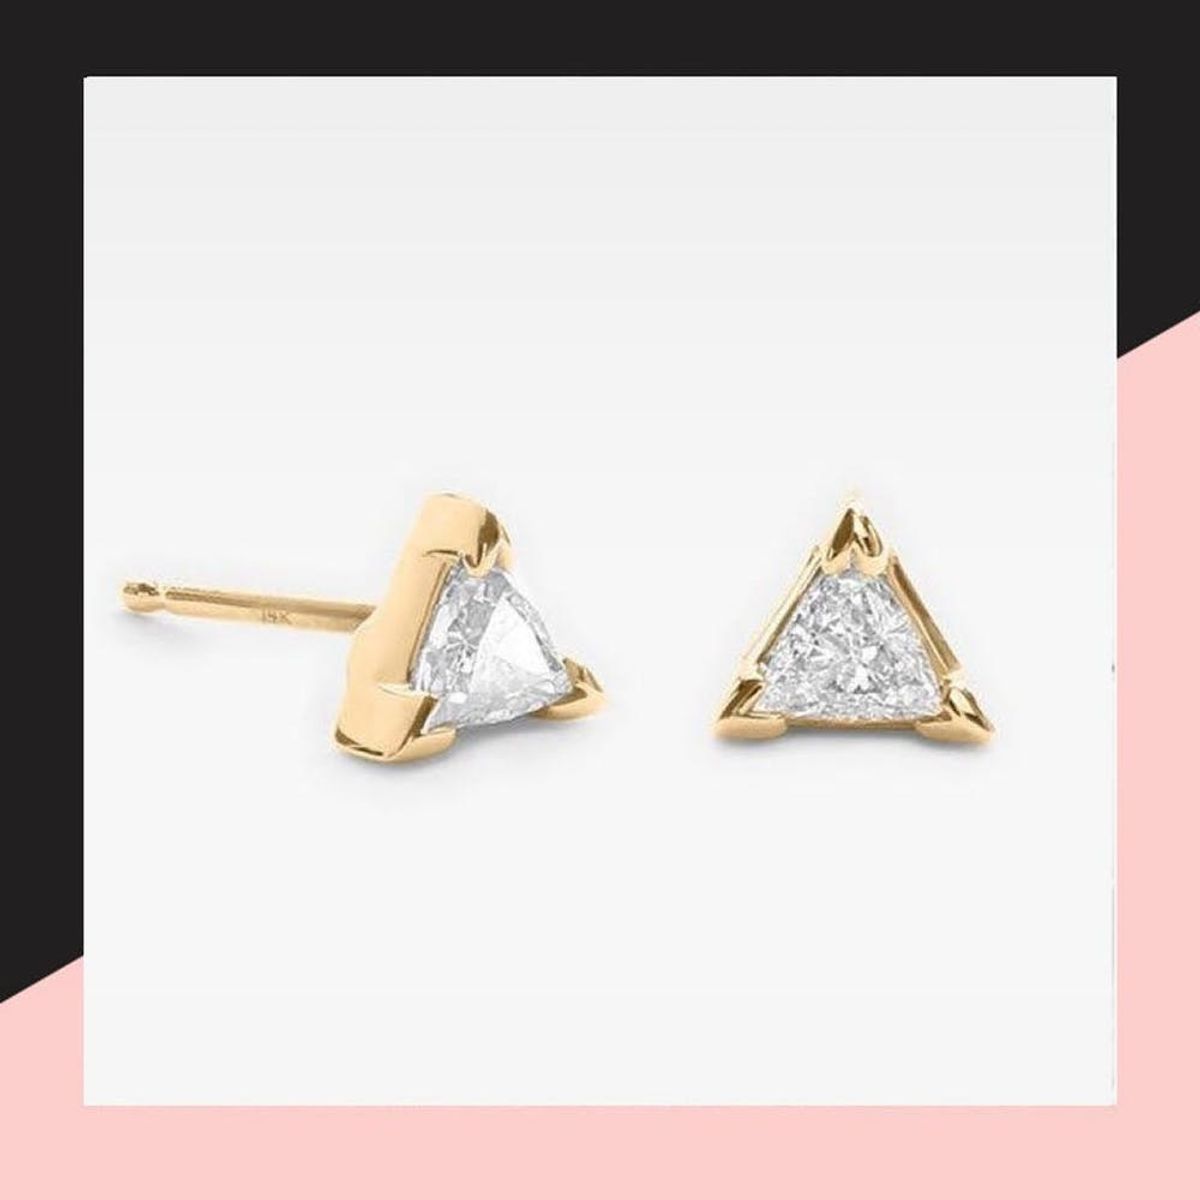 10 Jewelry Items to Own Now That You’re an Adult